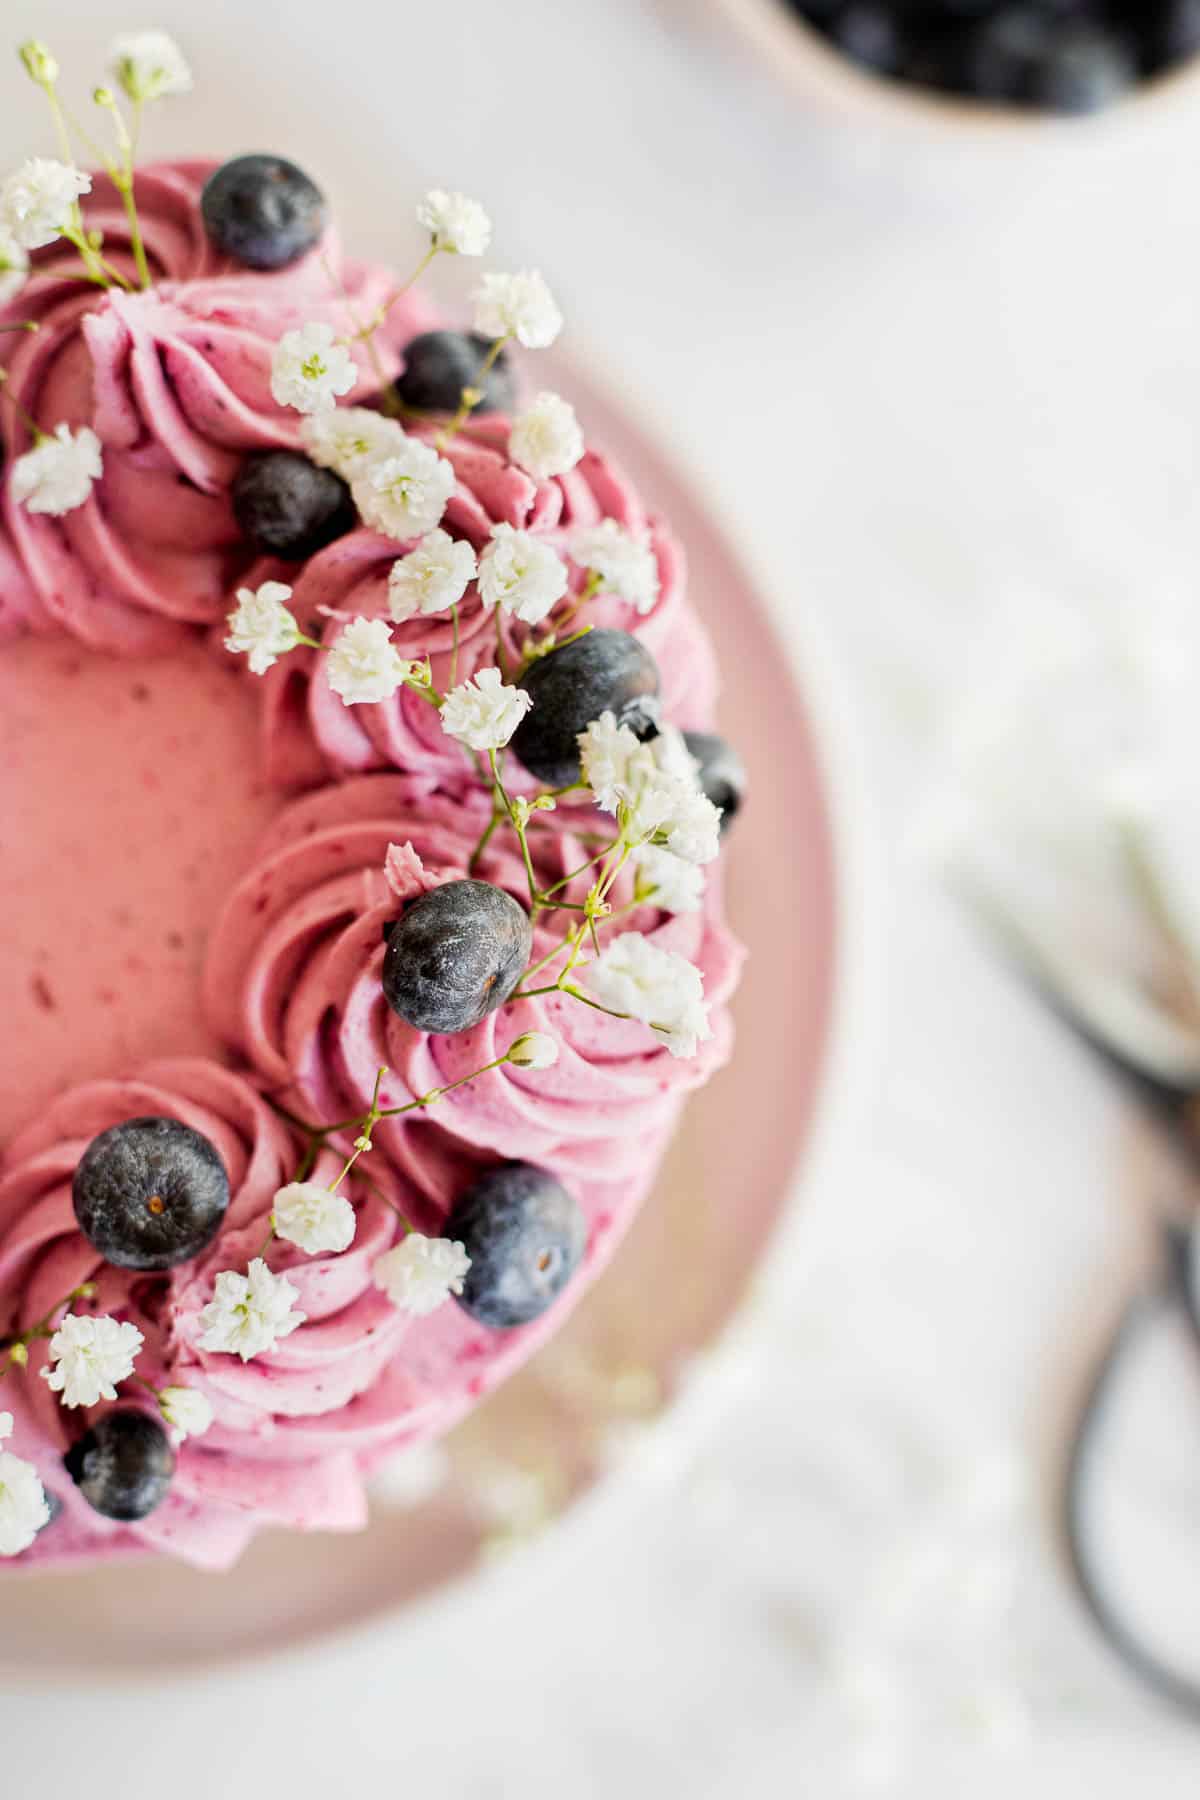 overhead shot of a cake with blueberry buttercream decorated with flowers and fresh berries.